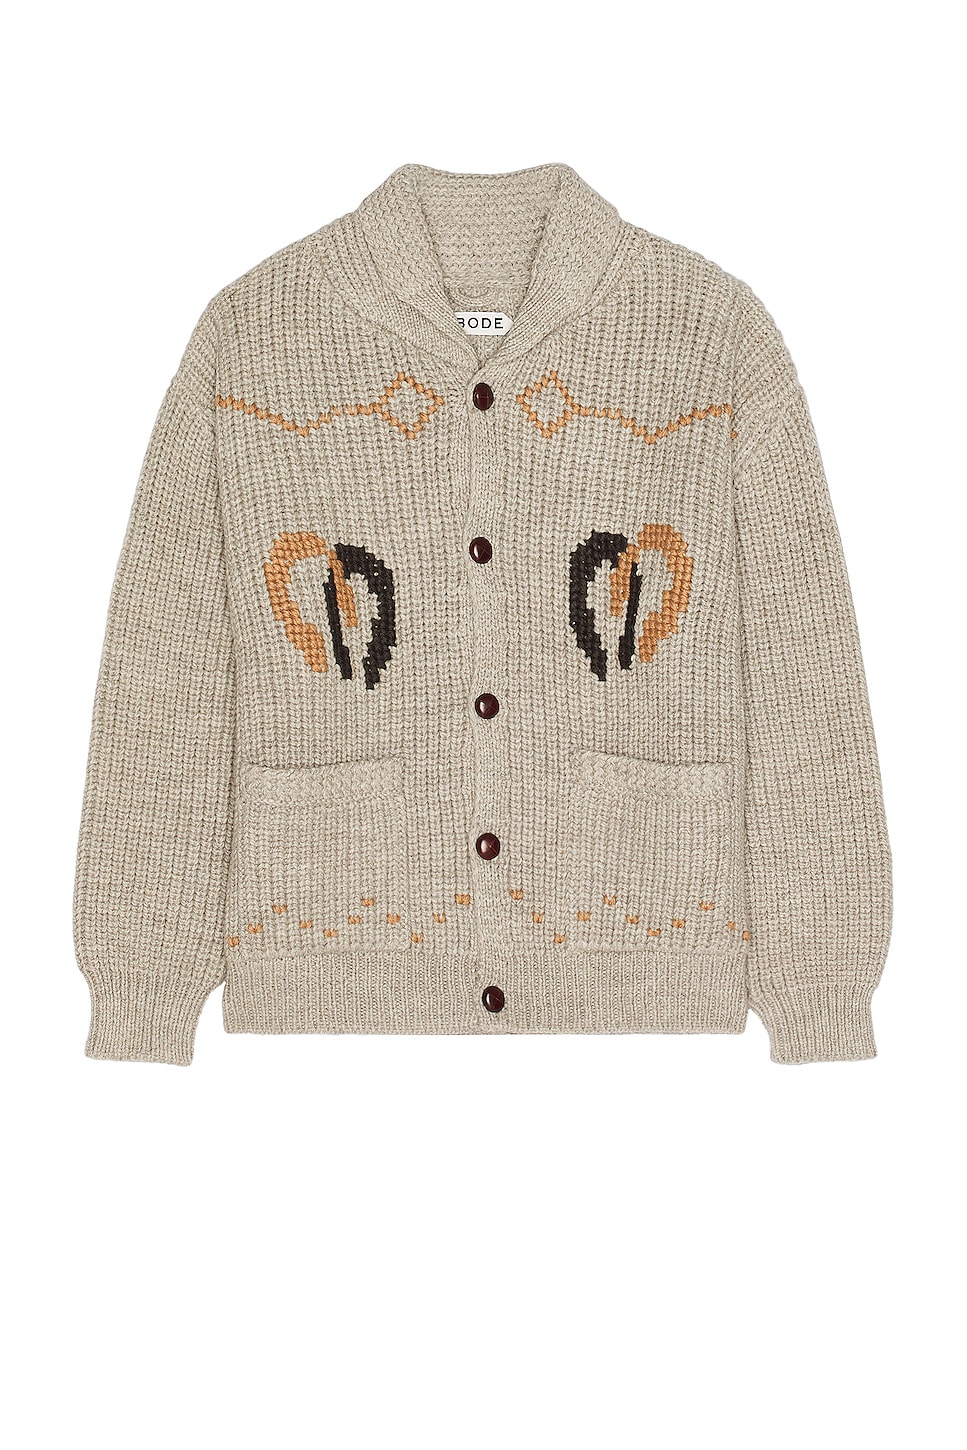 Image 1 of BODE Pony Cardigan in Tan